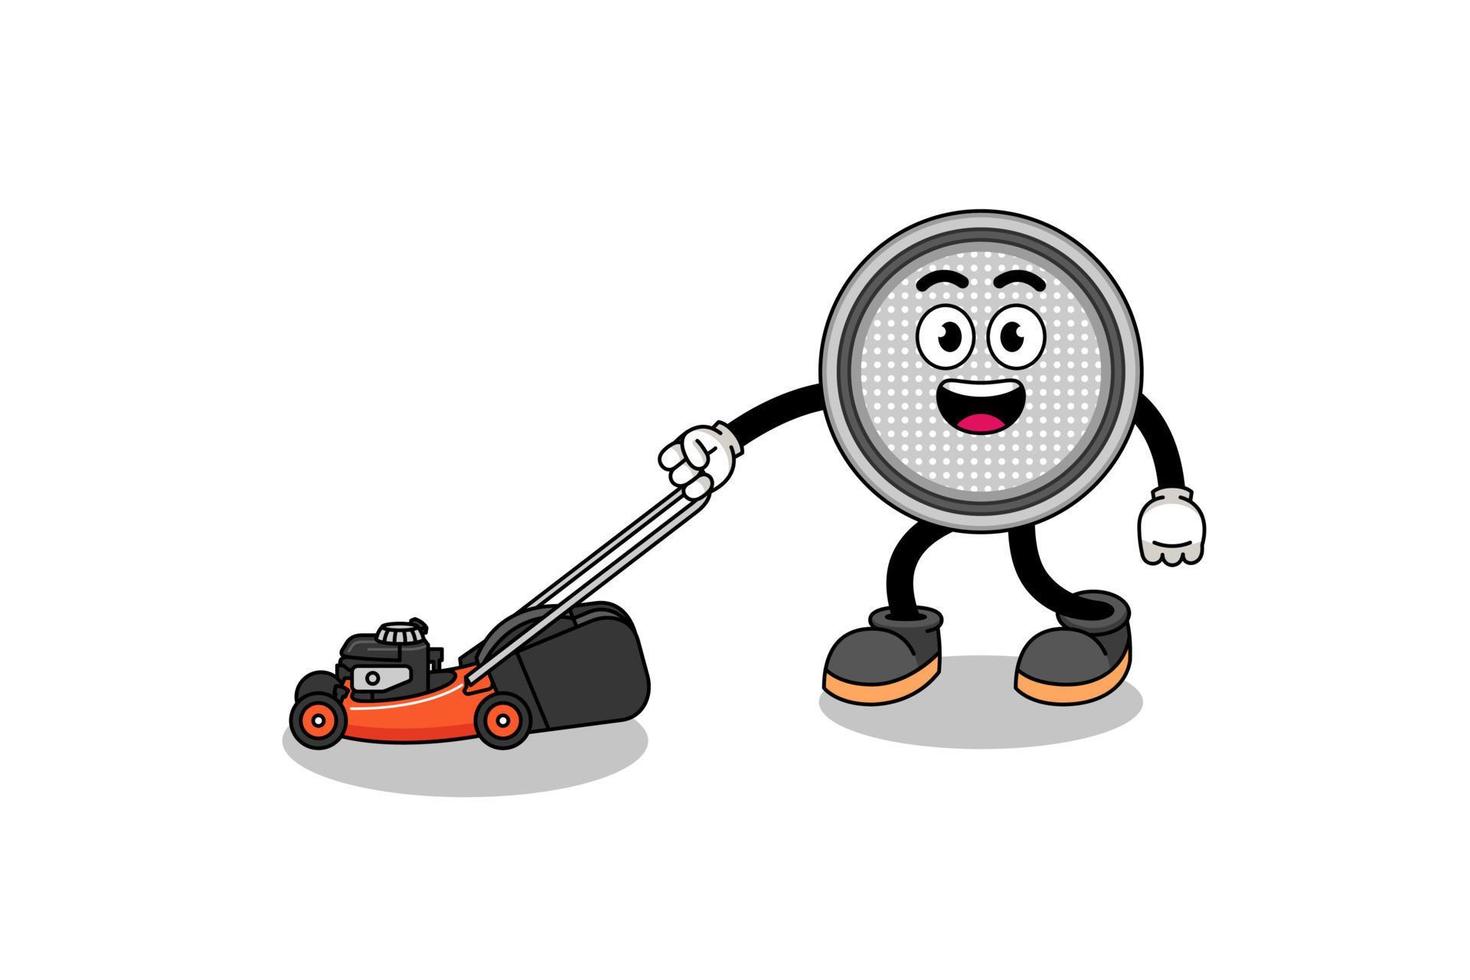 button cell illustration cartoon holding lawn mower vector